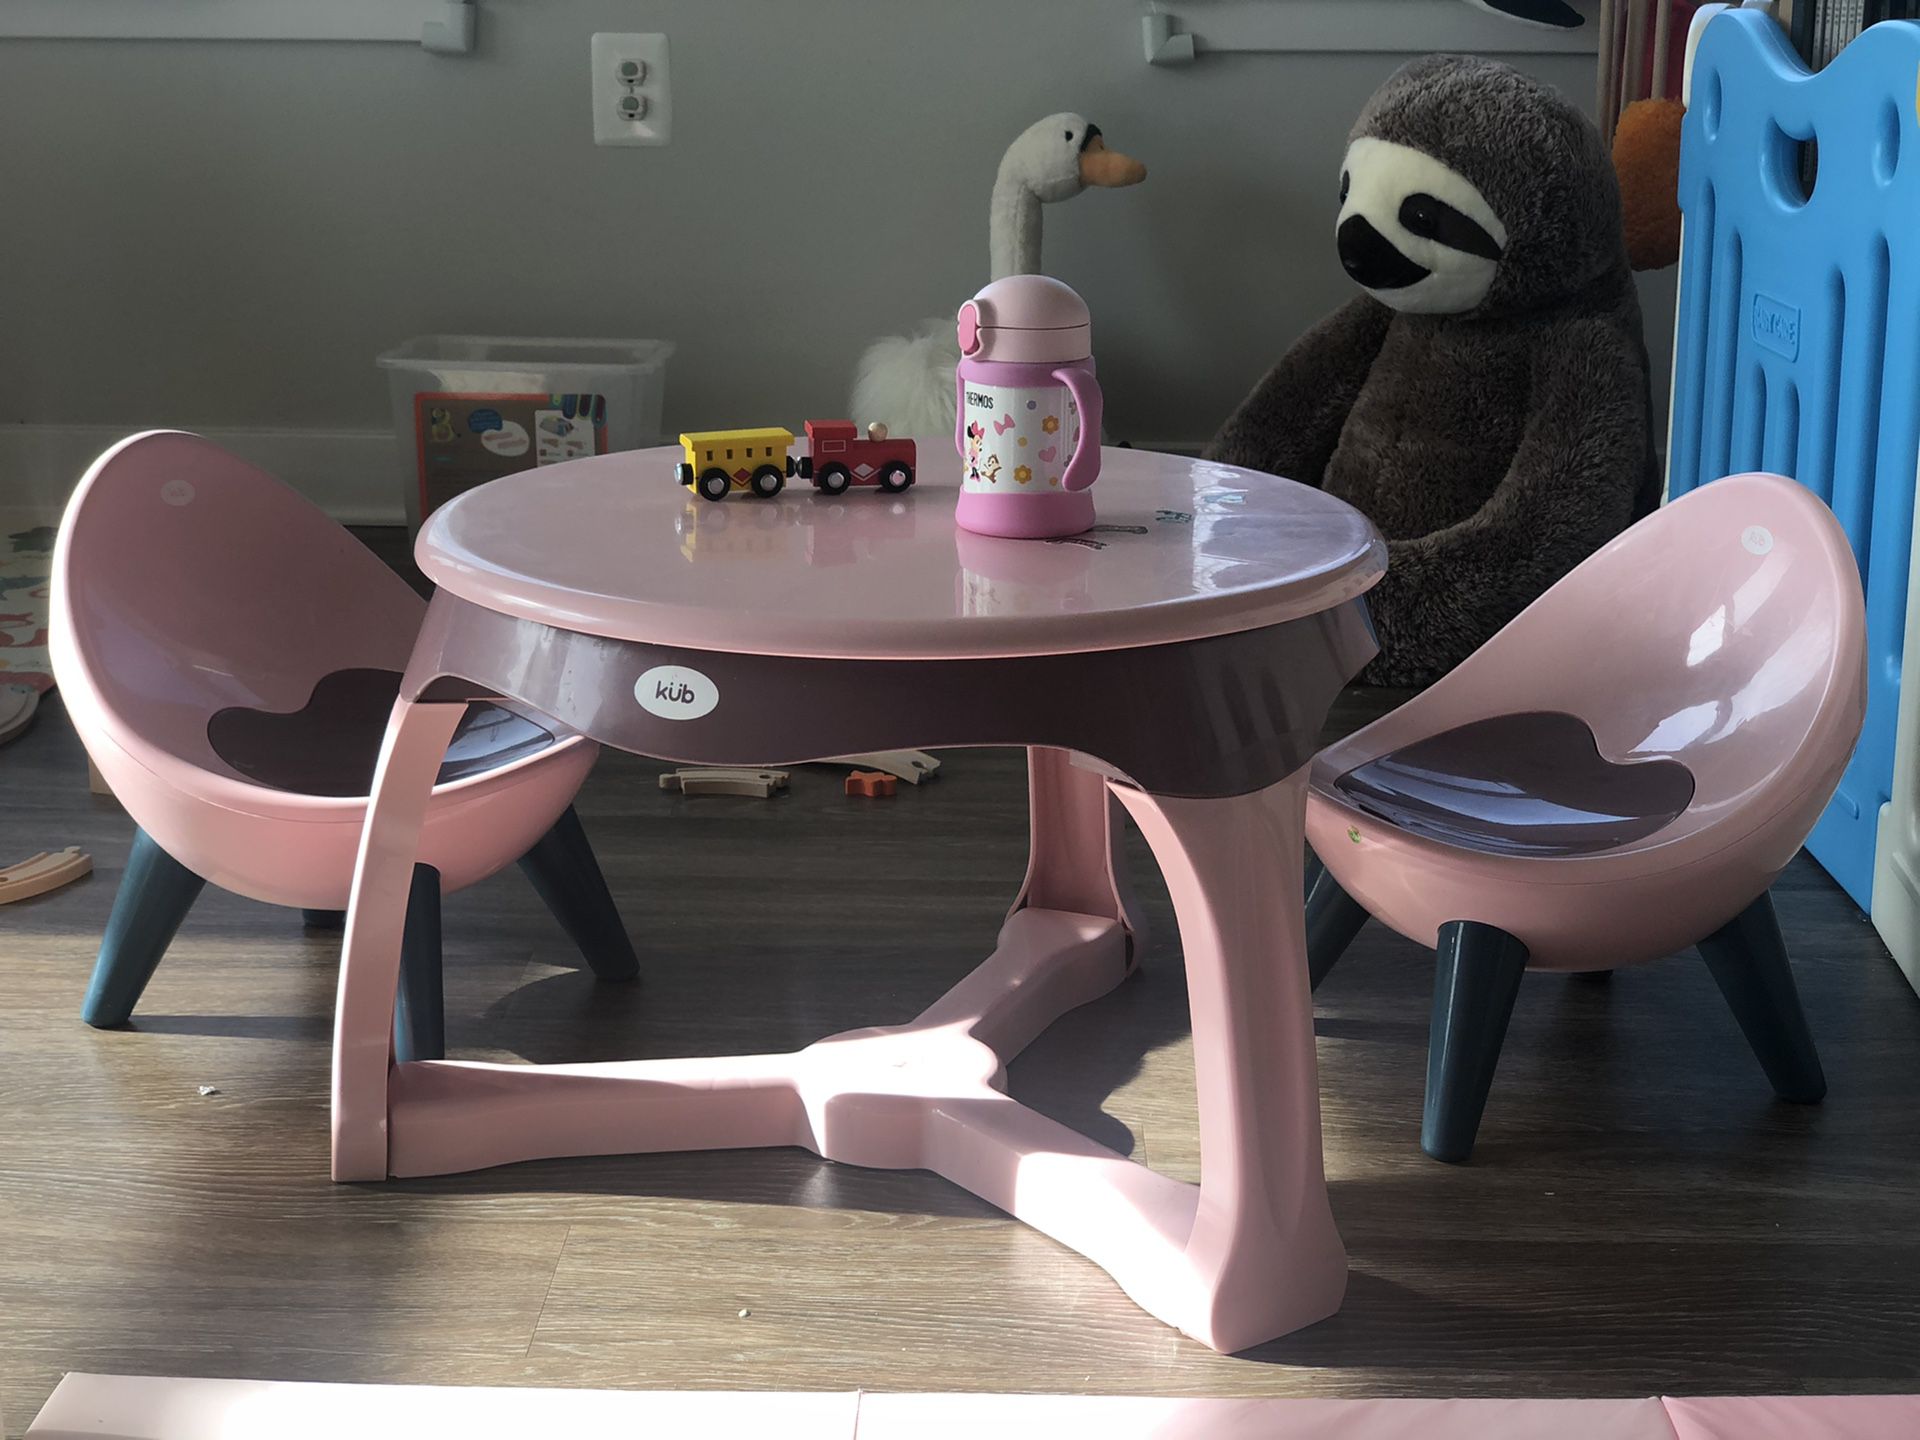 Toddler table and chair (x2) set